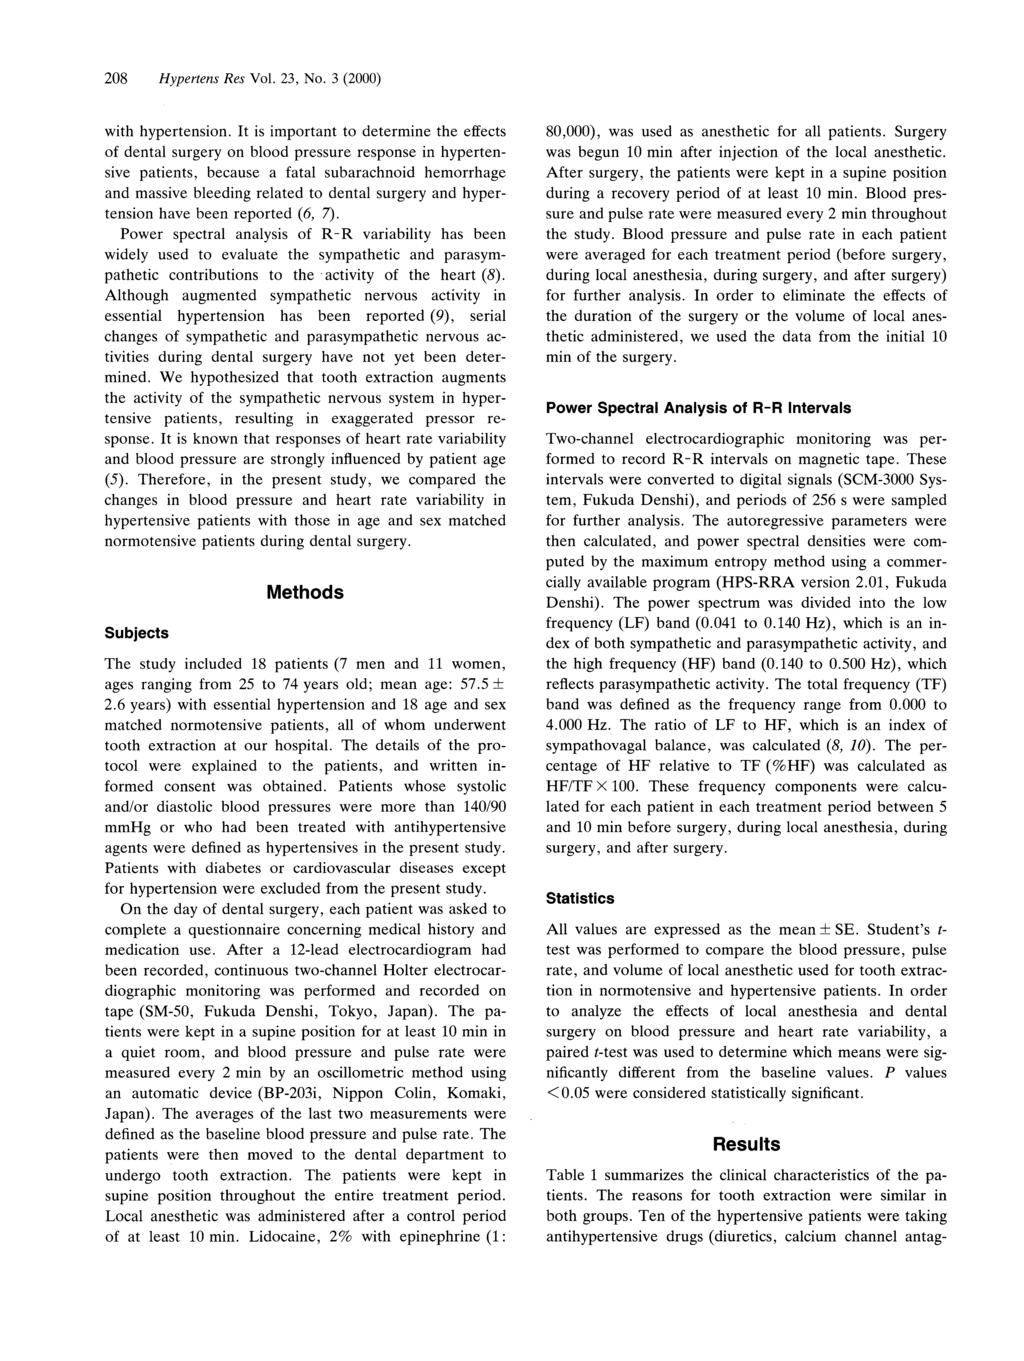 208 Hypertens Res Vol. 23, No. 3 (2000) with hypertension.